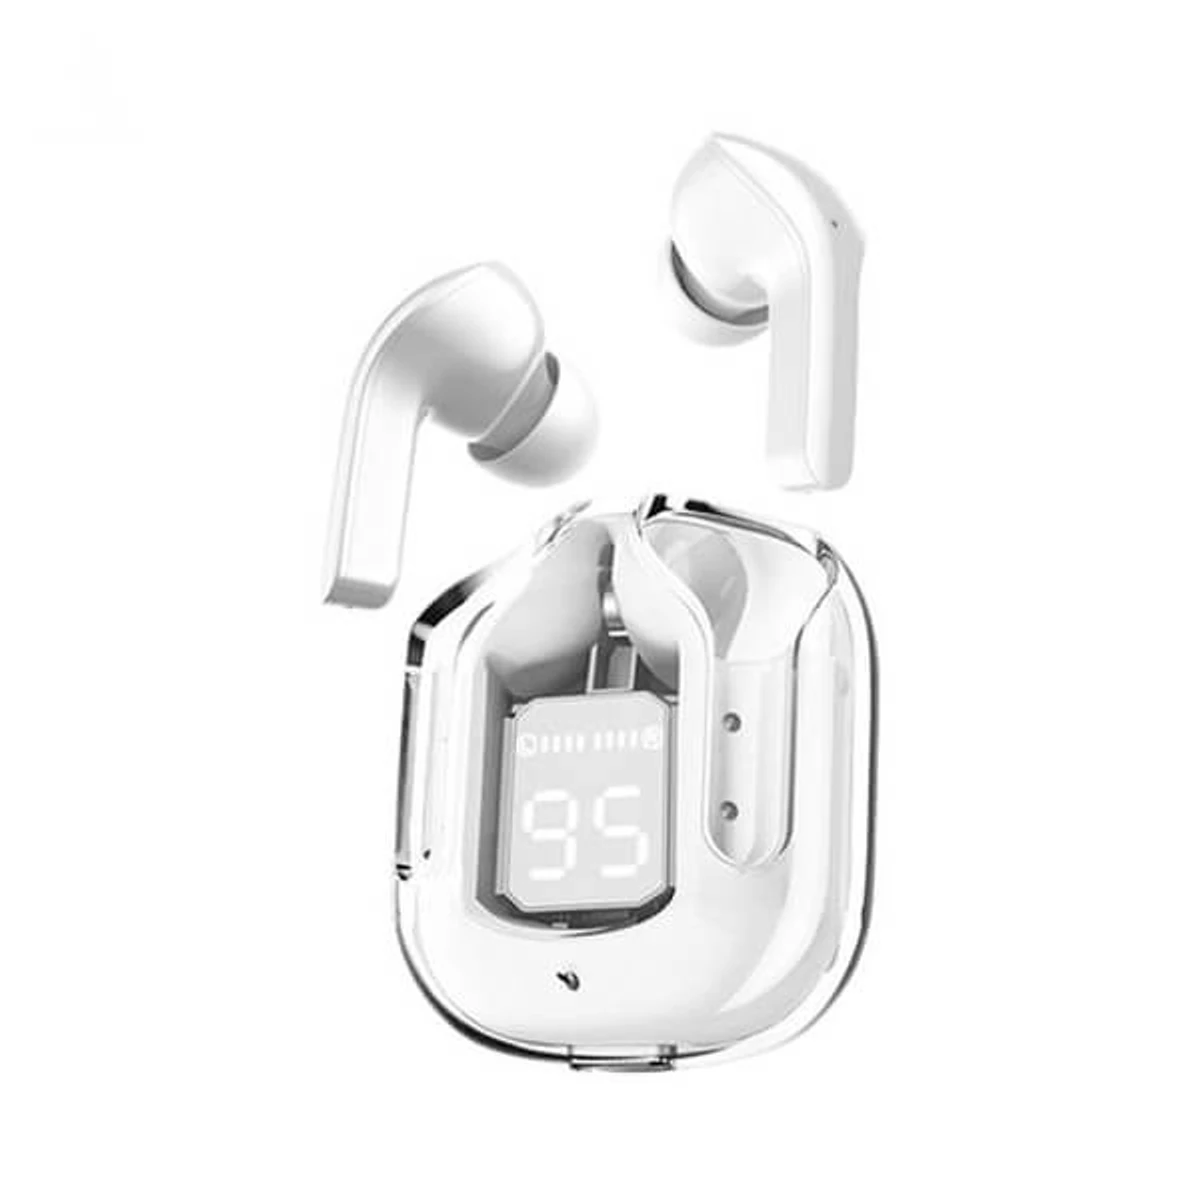 DUOPUNI TWS BT30 Wireless Transparent Bluetooth Headset With LED Display